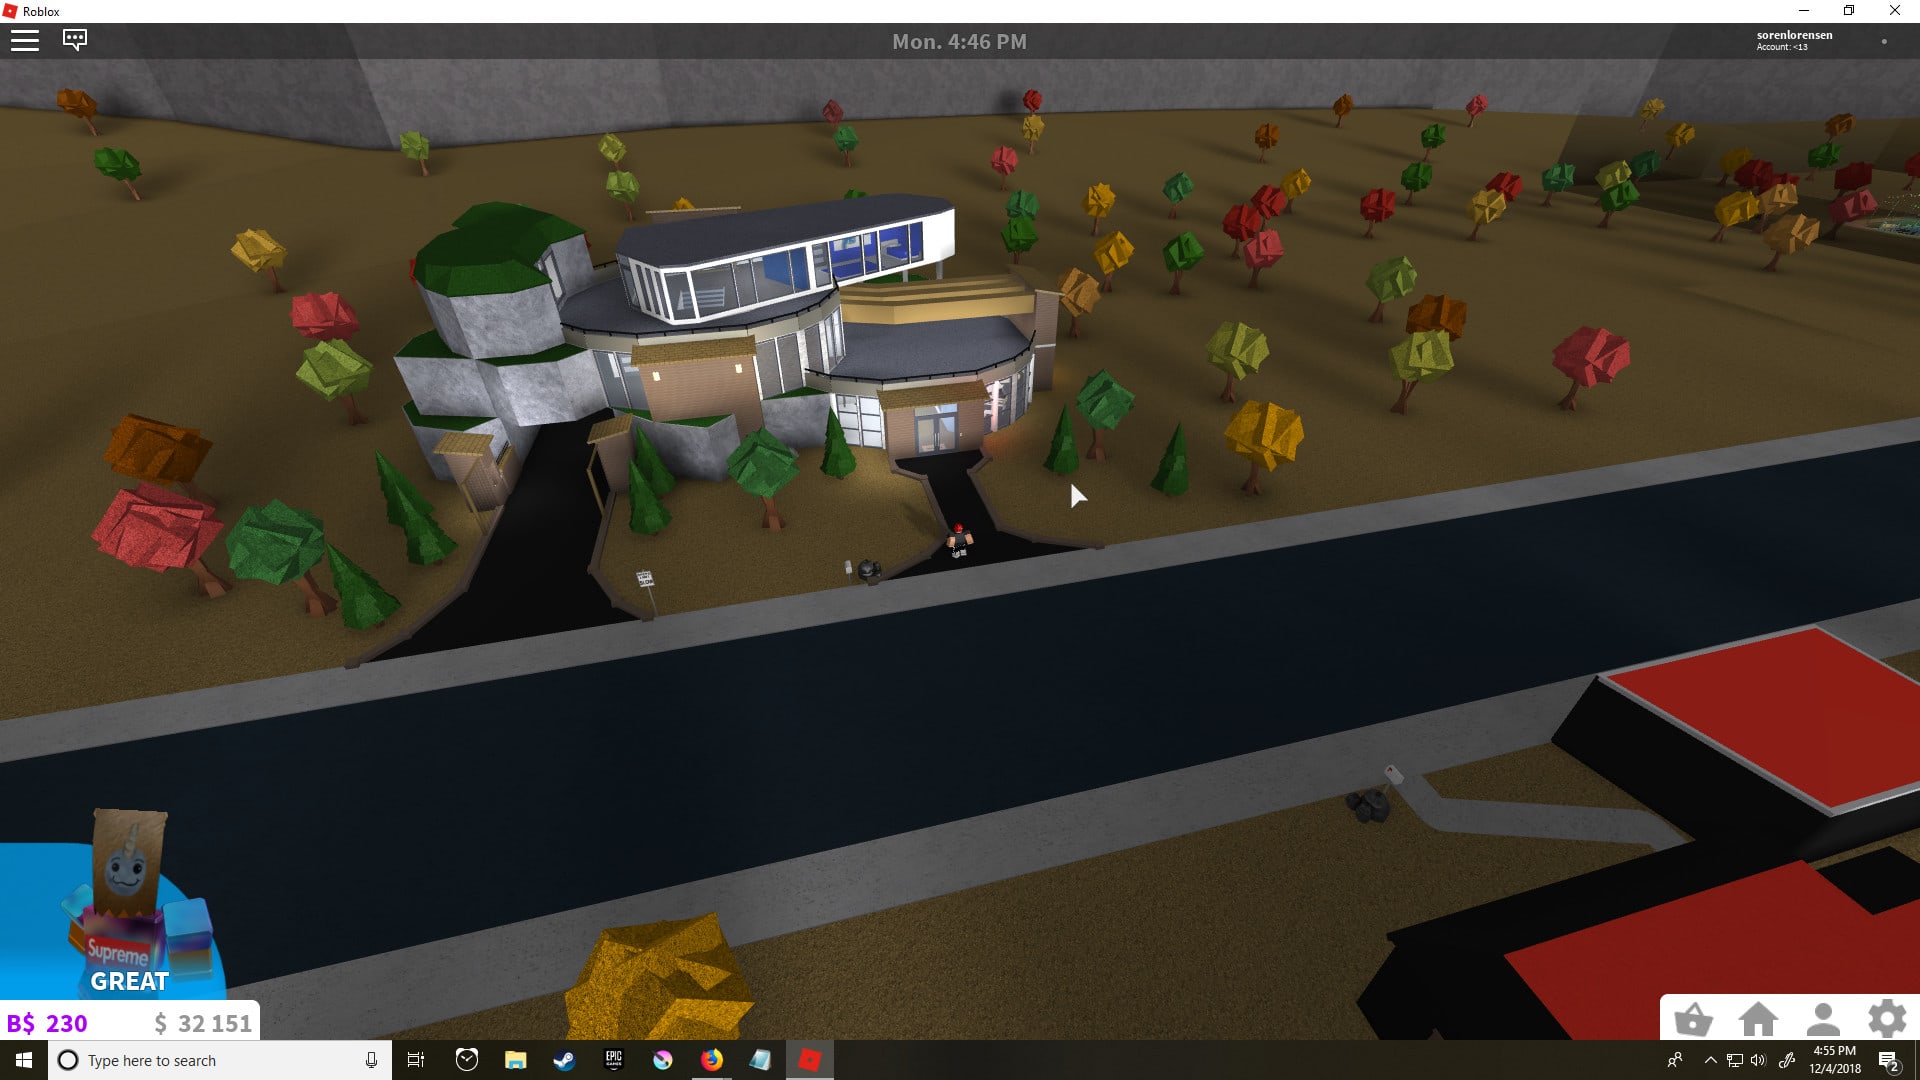 Play Roblox With You Or Build A House In Bloxburg By Sorenlorensen - 151 roblox